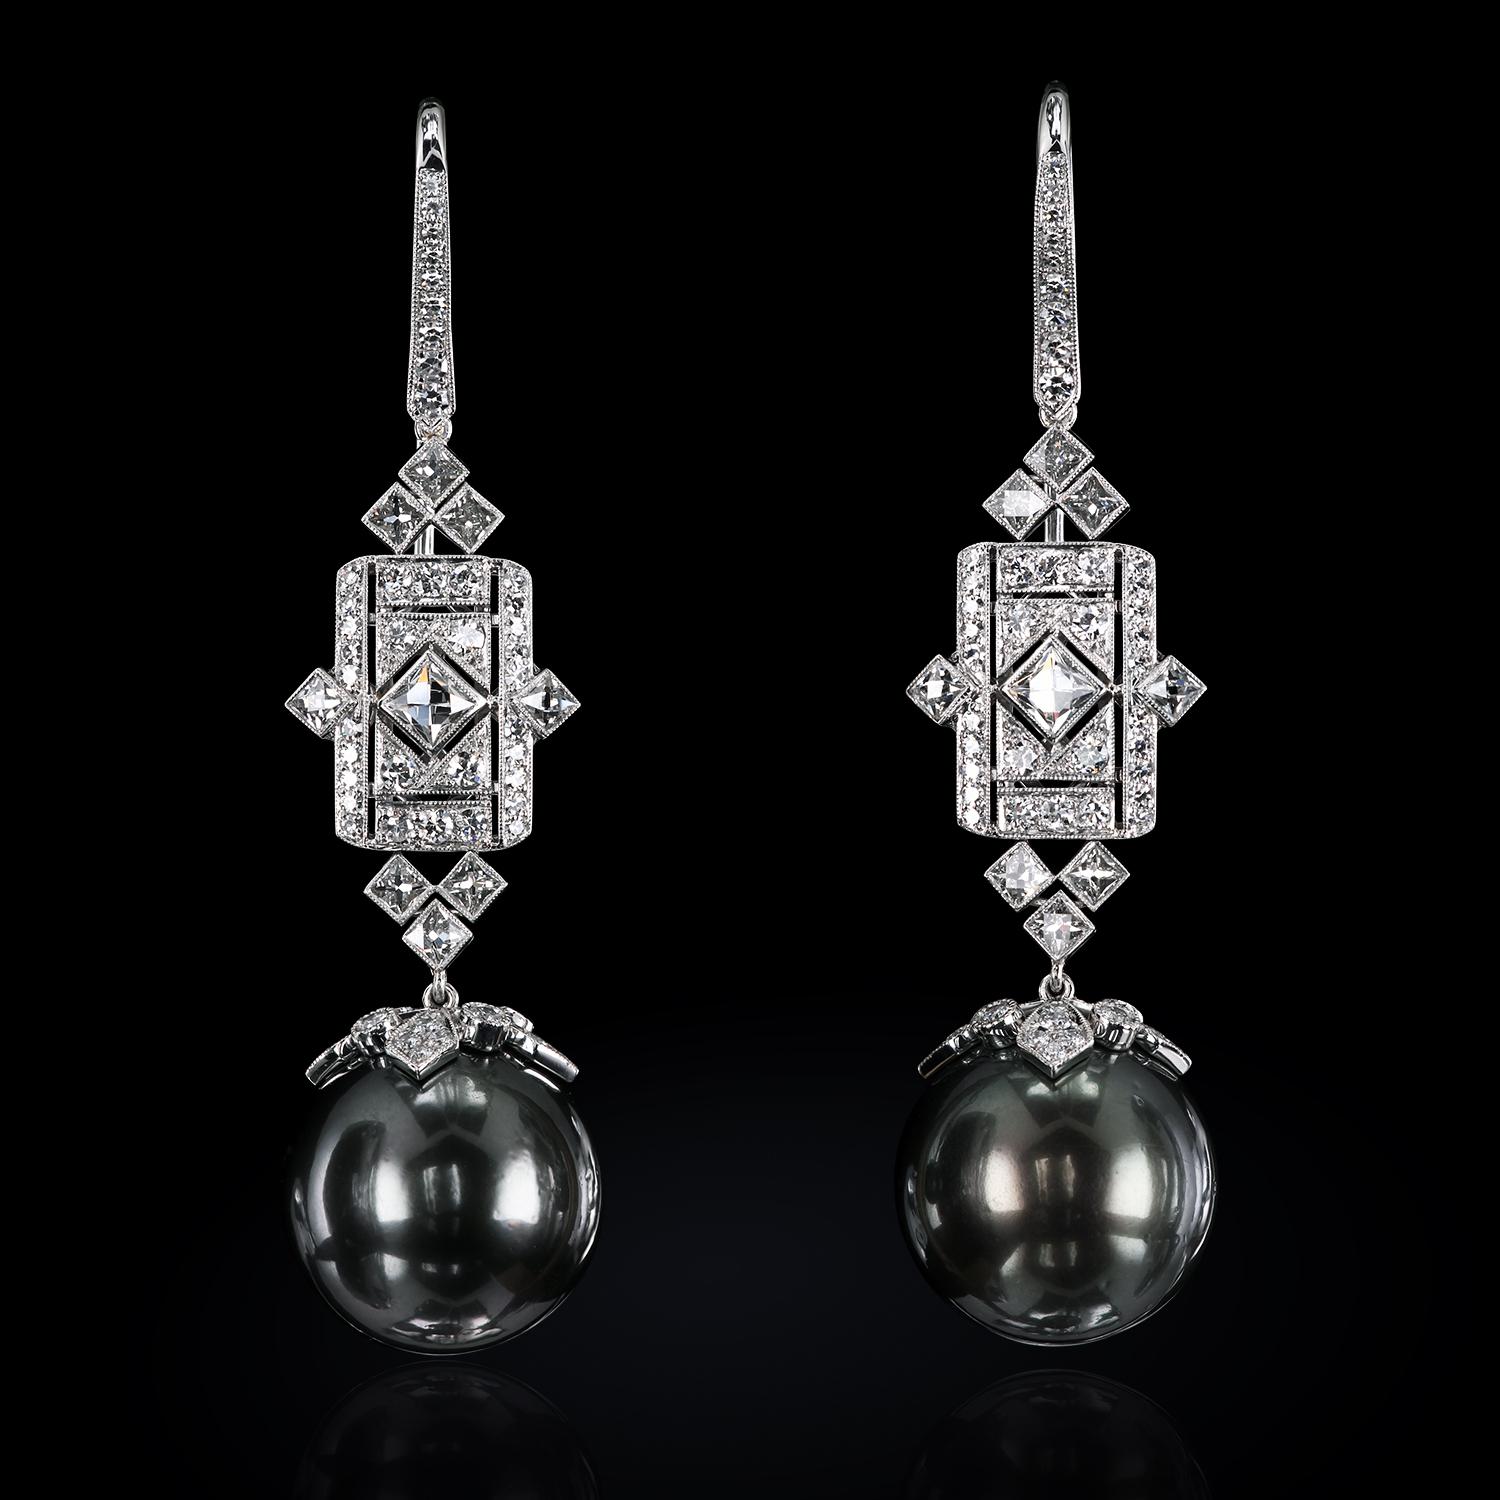 We are presenting you with the magnificent Art Deco-style diamond chandeliers set with French-cut diamonds. High-luster black South Sea Pearls are flexing their mussels for your enjoyment.
78 single cut diamonds 0.85 ctw
18 French cut diamonds 1.65